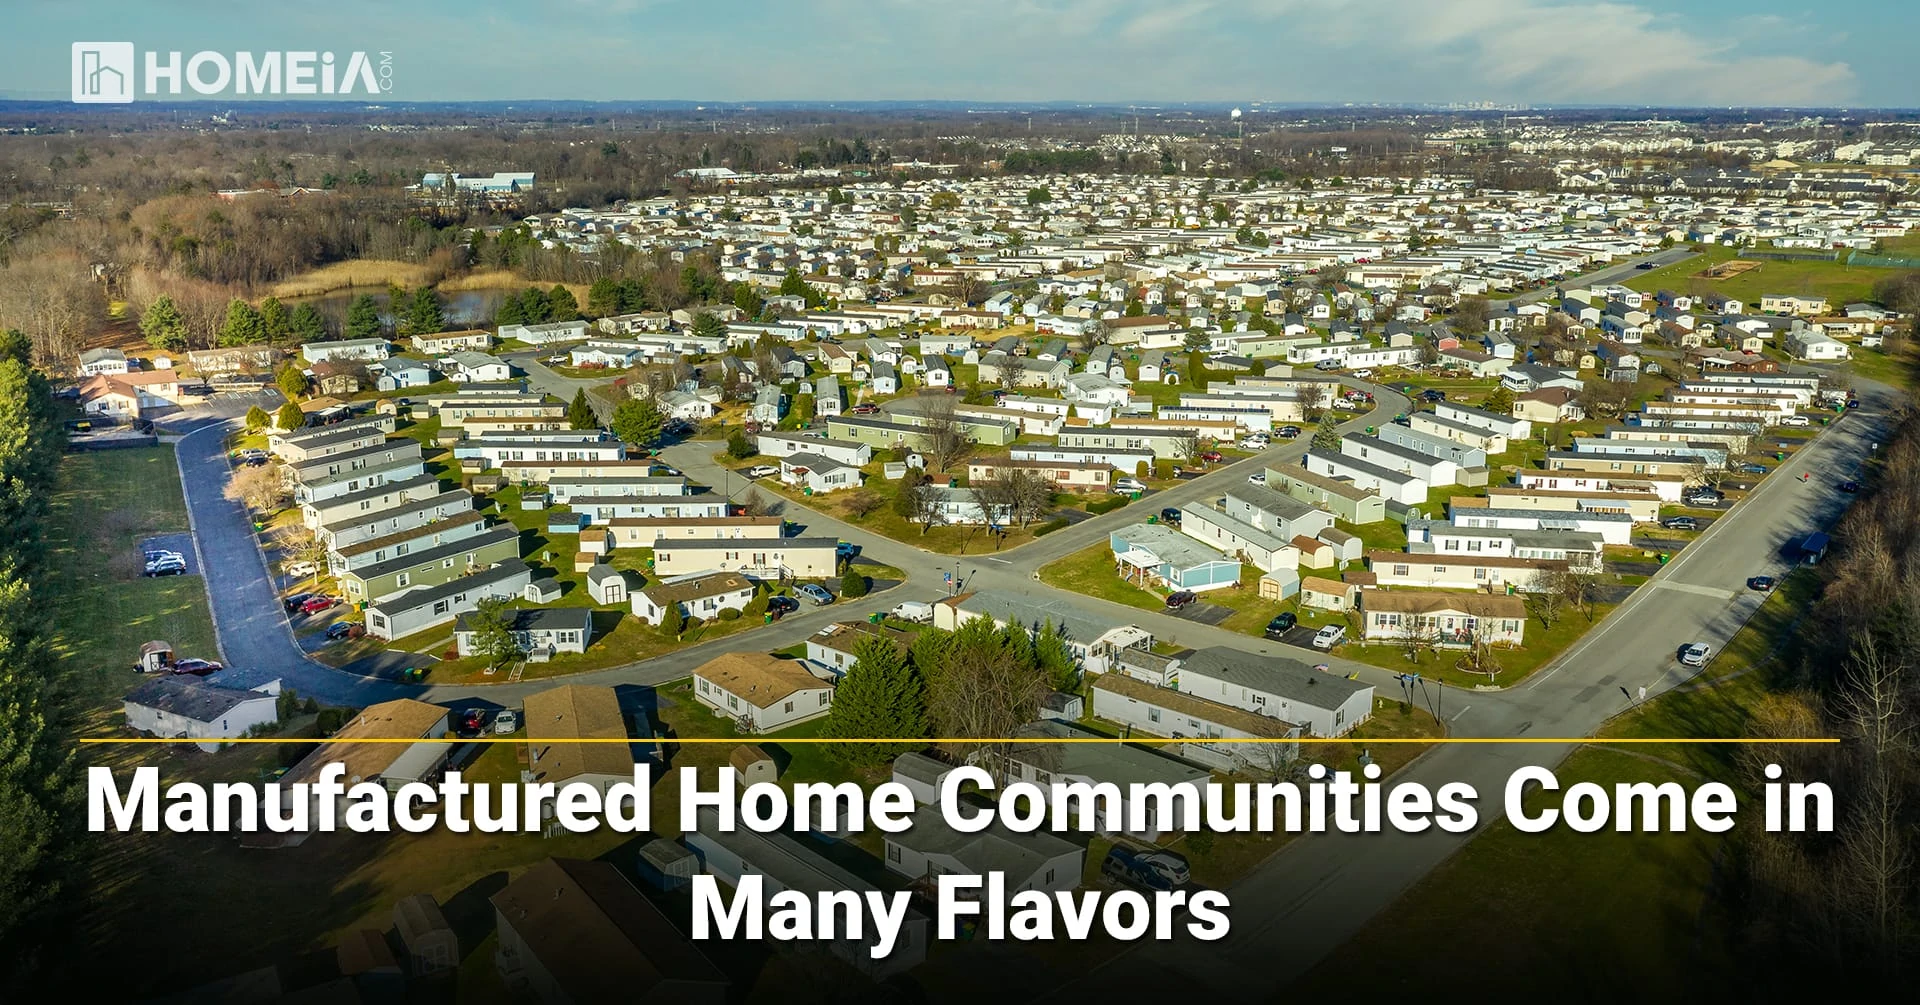 9 Common Types of Manufactured Home Communities - Pros & Cons